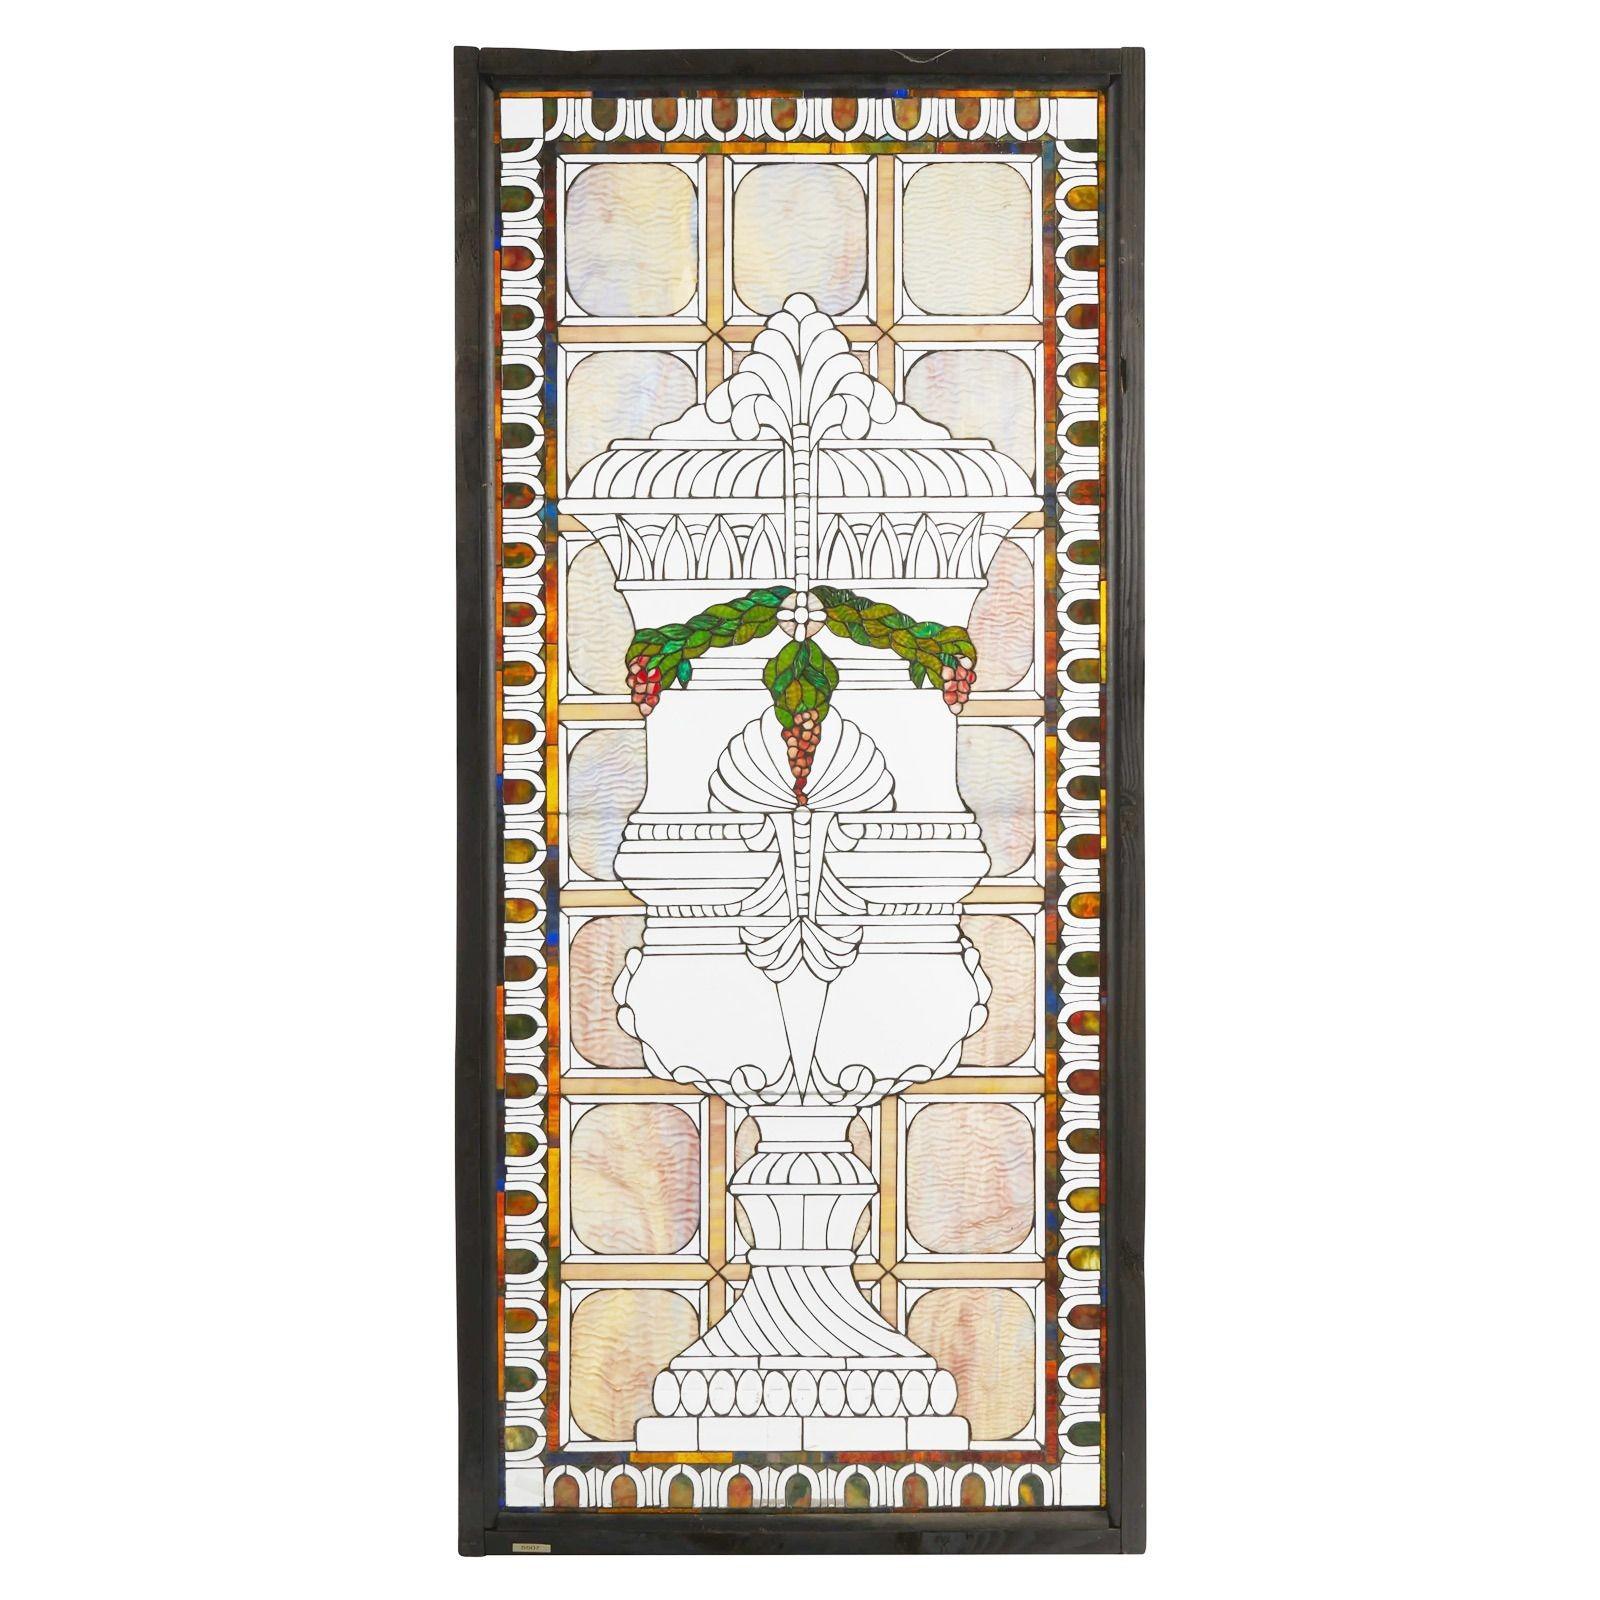 Set of four American Victorian leaded glass windows, Late 19th century
 
A set of multi-colored windows with slag glass, rippled glass, opalescent glass, and clear bevel glass with central urn and grapevine motifs, each with a different color